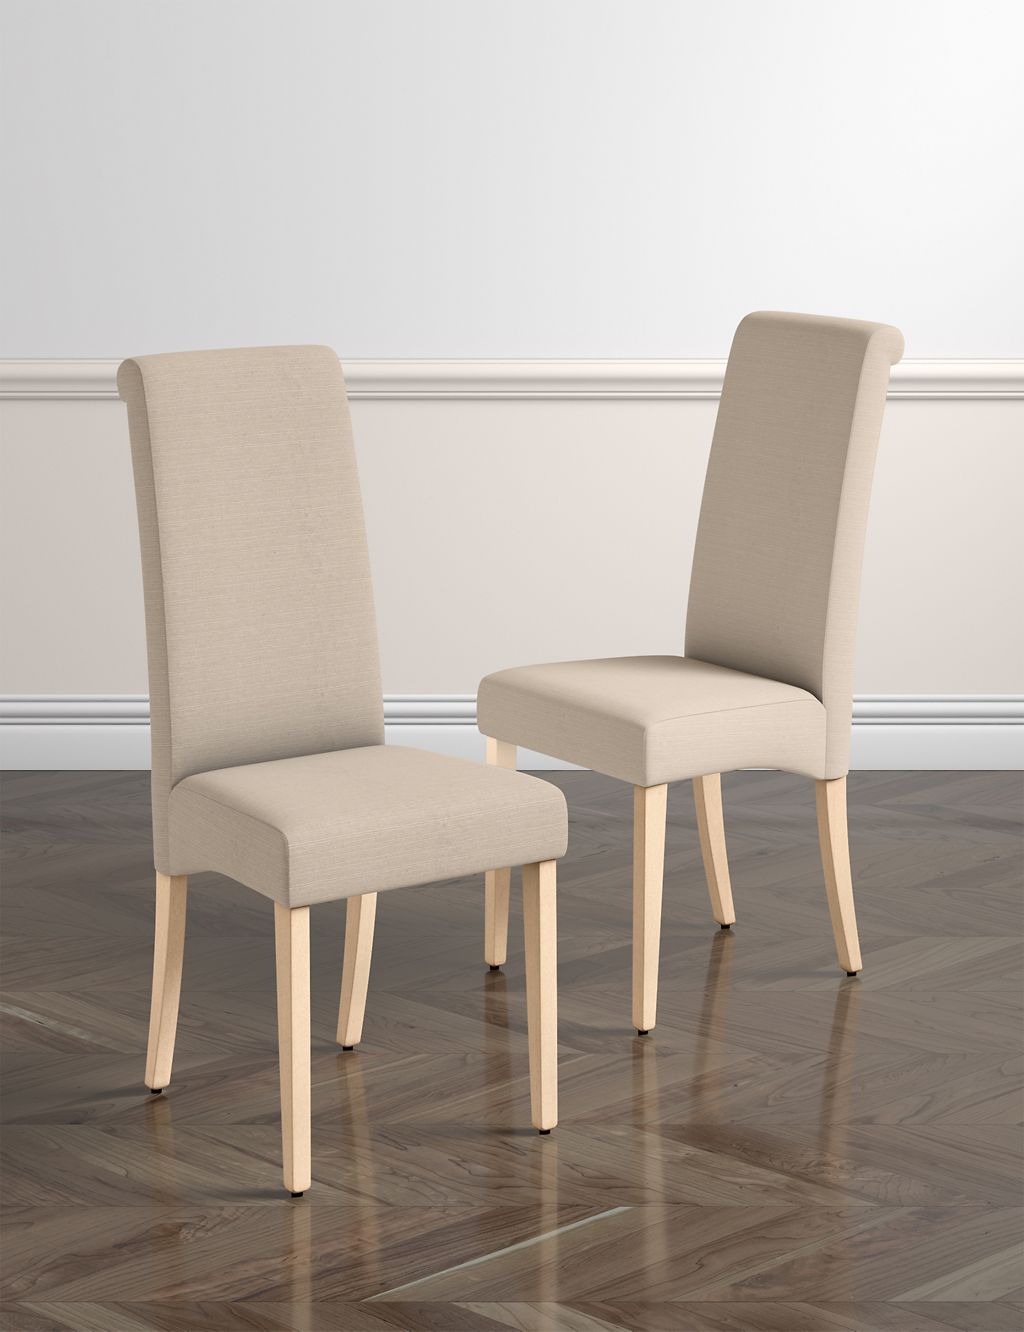 Set of 2 Scroll Back Dining Chairs 1 of 9